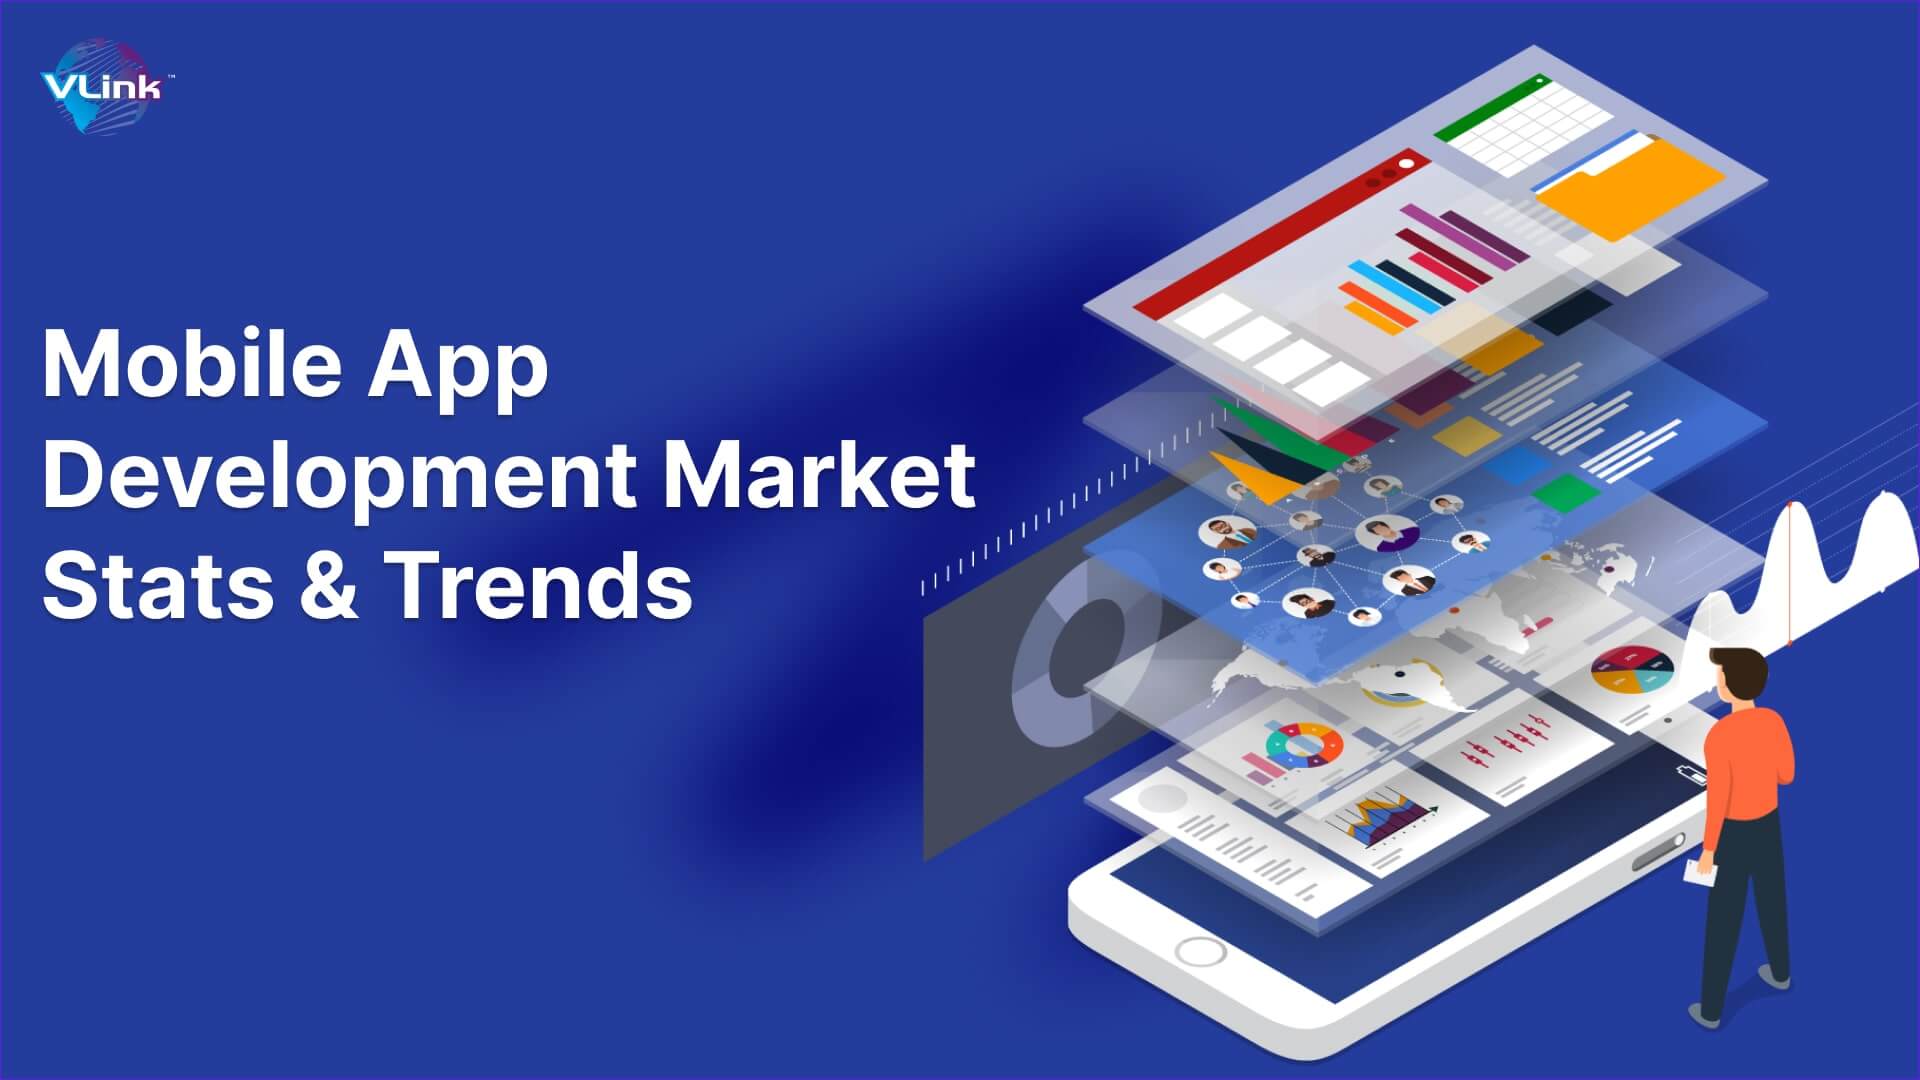 Mobile App Development Market Stats & Trends to Know